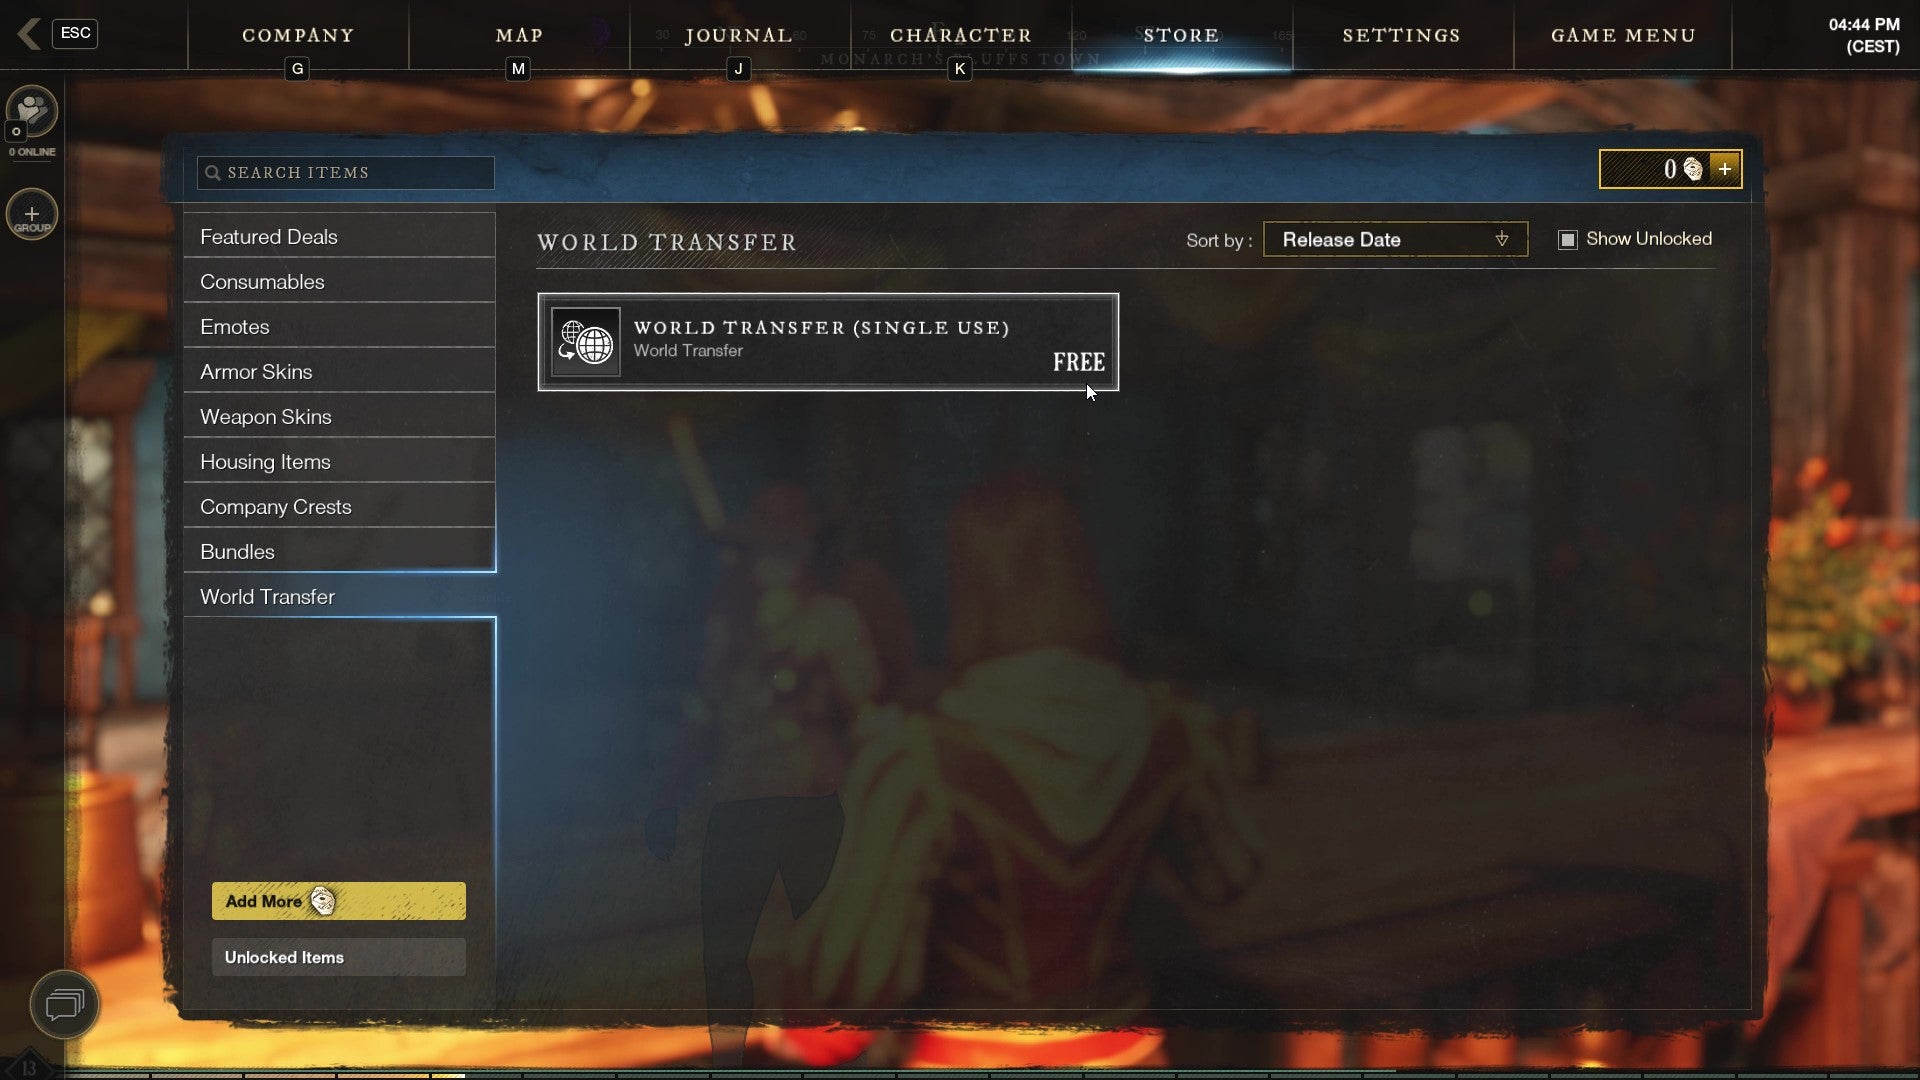 The New World Store page, showing the item page for a World Transfer (Single Use) free token.